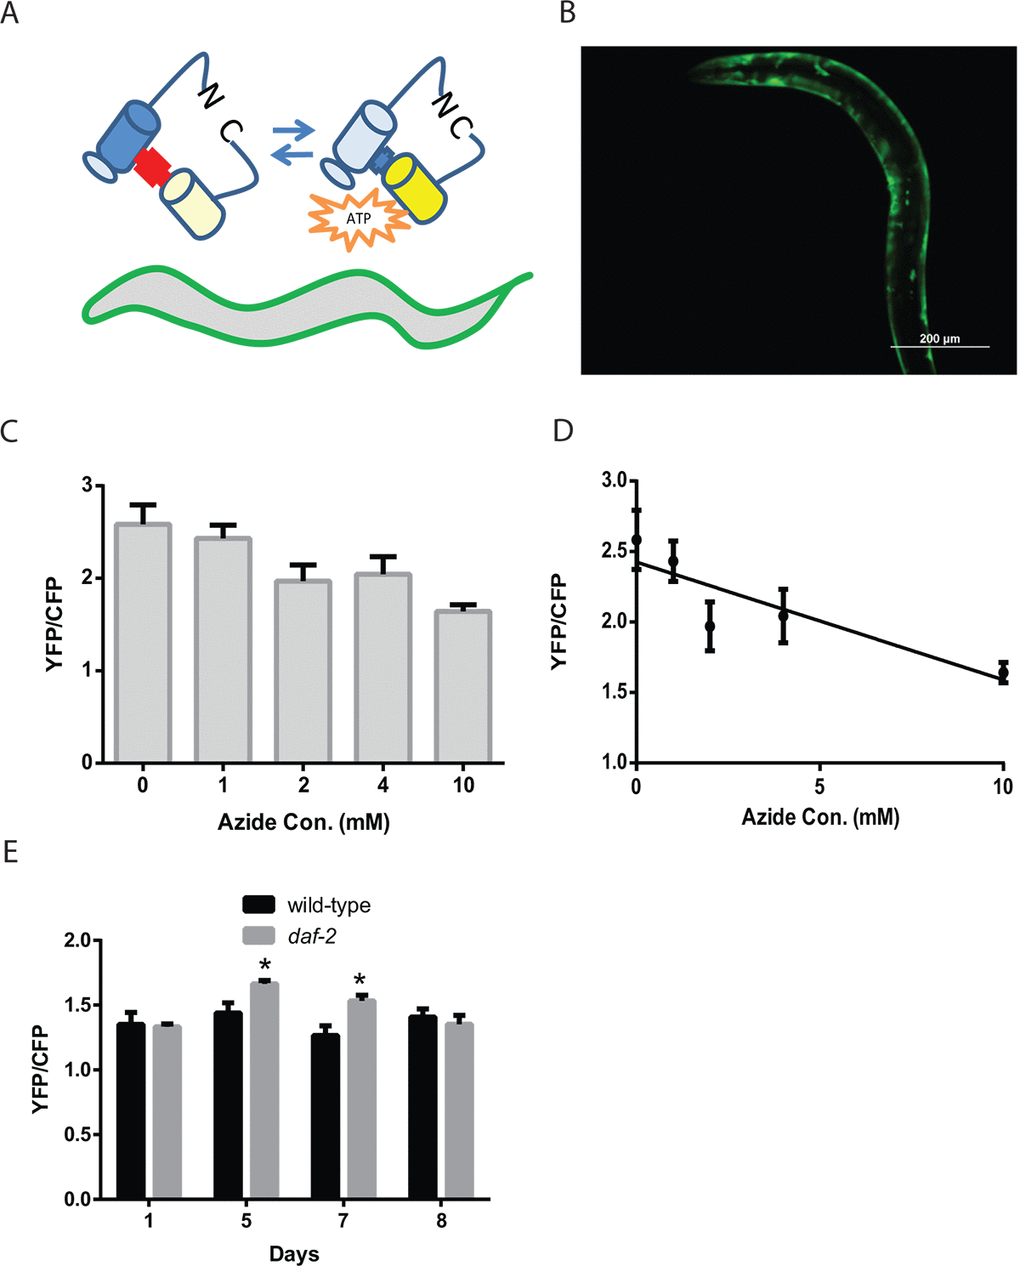 Reduced daf-2 insulin-like signaling increases ATP levels in C. elegans muscle. (A) Cartoon of the ATeam ratiometric reporter (Adenosine 5’-Triphosphate indicator based on Epsilon subunit for Analytical Measurement) which consists of the cyan fluorescent protein derivative mseCFP and the yellow fluorescent protein mVenus flanking the ε-subunit of from the F0F1-ATP synthase from Bacillus subtilis. The subunit from the F0F1-ATP synthase binds ATP and thereby changes in the spatial arrangement of the fluorophores which then results in alterations in the excitation of the yellow fluorophore by the cyan fluorophore via FRET. (B) Fluorescence image of a wild-type worm expressing the ATeam reporter under the control of the myo-3 promoter in the body-wall muscle. Image was captured using a GFP filter set which can visualize mVenus fluorescence. Bar: 200 µm. (C) ATeam shows a reduction in the ratio of mVenus to mseCFP fluorescence (YFP/CFP) when ATP levels are reduced by treatment with the mitochondrial inhibitor sodium azide. Worms expressing ATeam in the muscle were treated with increasing doses of sodium azide for 1 hour before being mounted and digitally imaged. N >12 for all treatments. These data also exhibit a linear decline when plotted as an X-Y graph (D). (E) The daf-2 mutants have increased muscle ATP levels on adult day 5 and day 7 as shown by the imaging of wild-type and daf-2 mutant animals expressing the ATeam reporter. Each bar represents the average ATeam YFP/CFP ratio from the muscles of daf-2 mutant and wild-type animals on the indicated days of adulthood. N >12 for all ages and genotypes. * represents p t‐test.